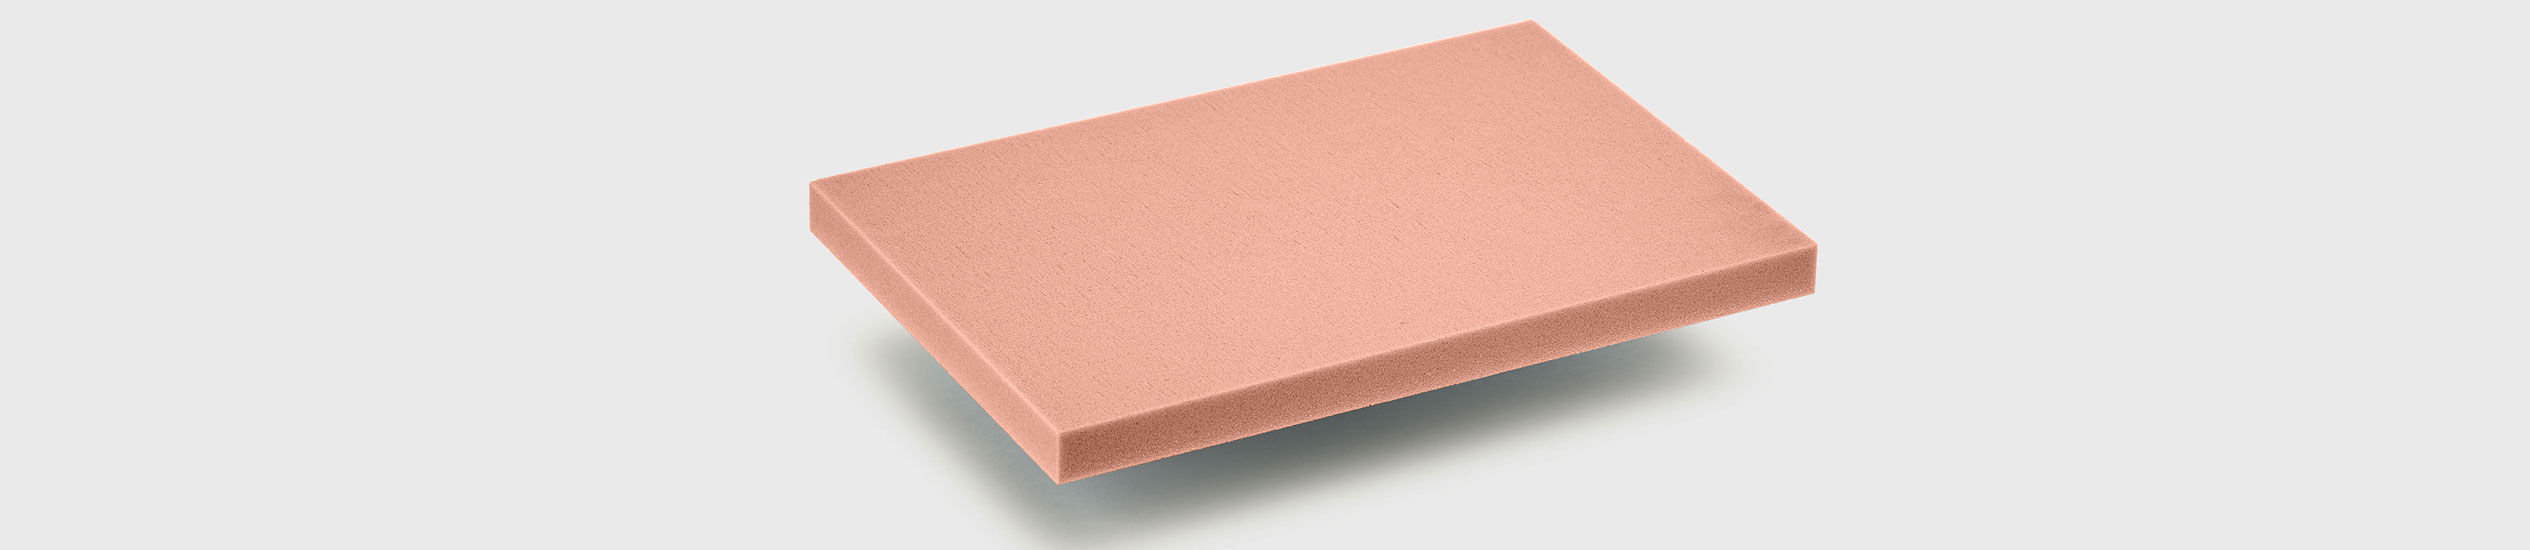 PVC foam offers optimal stiffness-to-weight-ratio, good impact strength , water resistance, thermal insulation, low resin absorption and high fatigue resistance